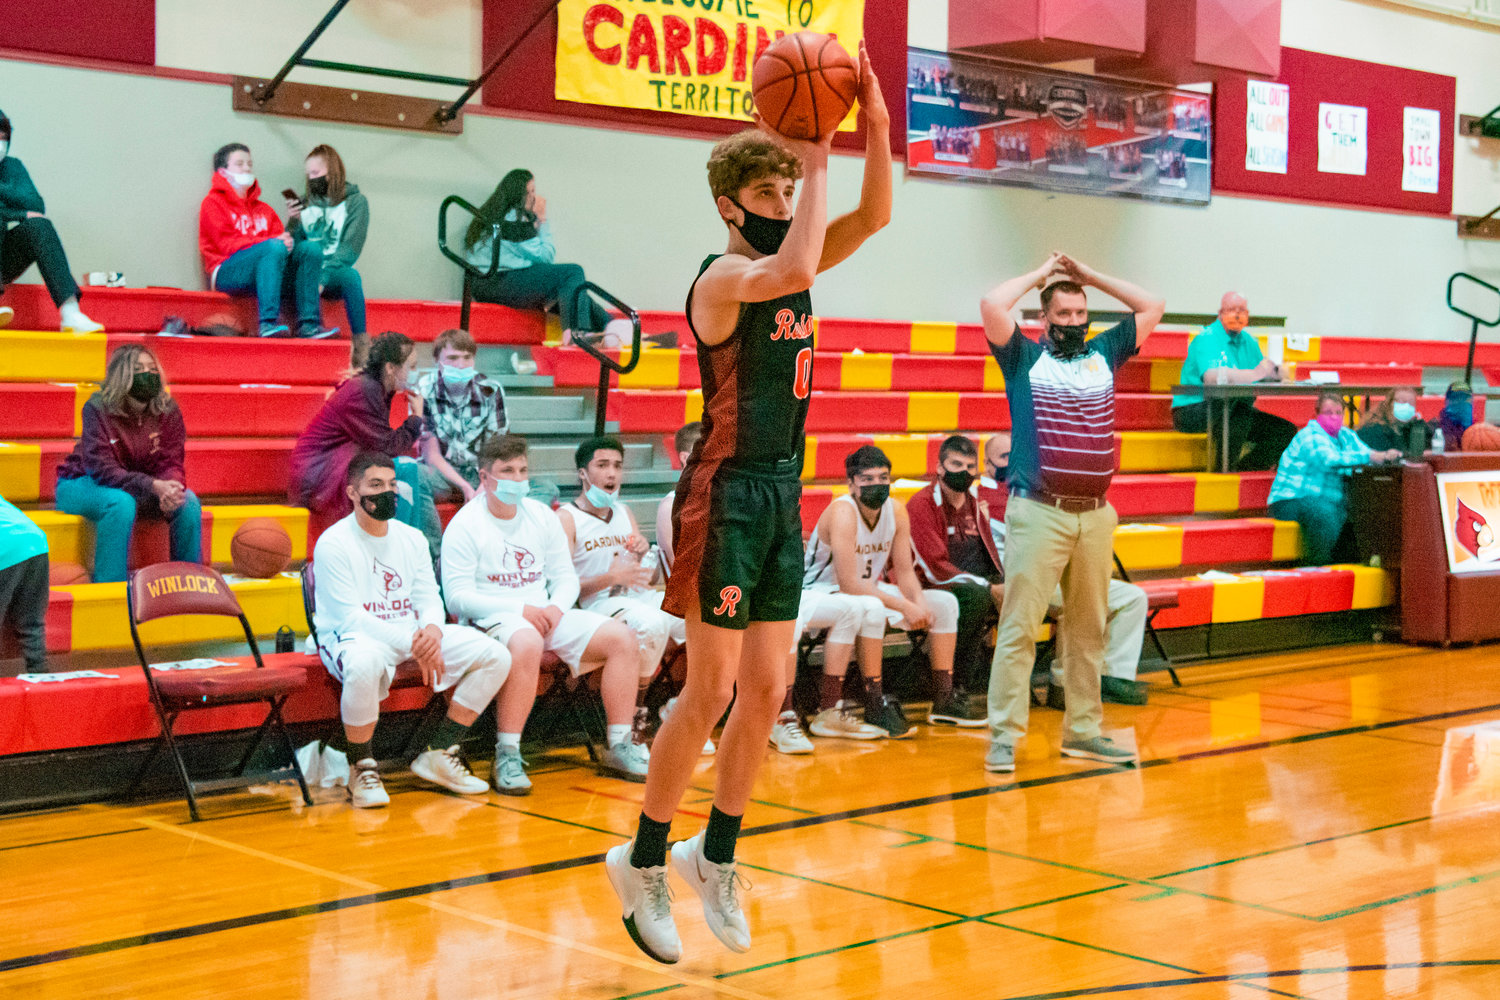 Rainier’s Ian Sprouffske (0) makes a three-point shot during a game against the Cardinals Wednesday evening in Winlock.